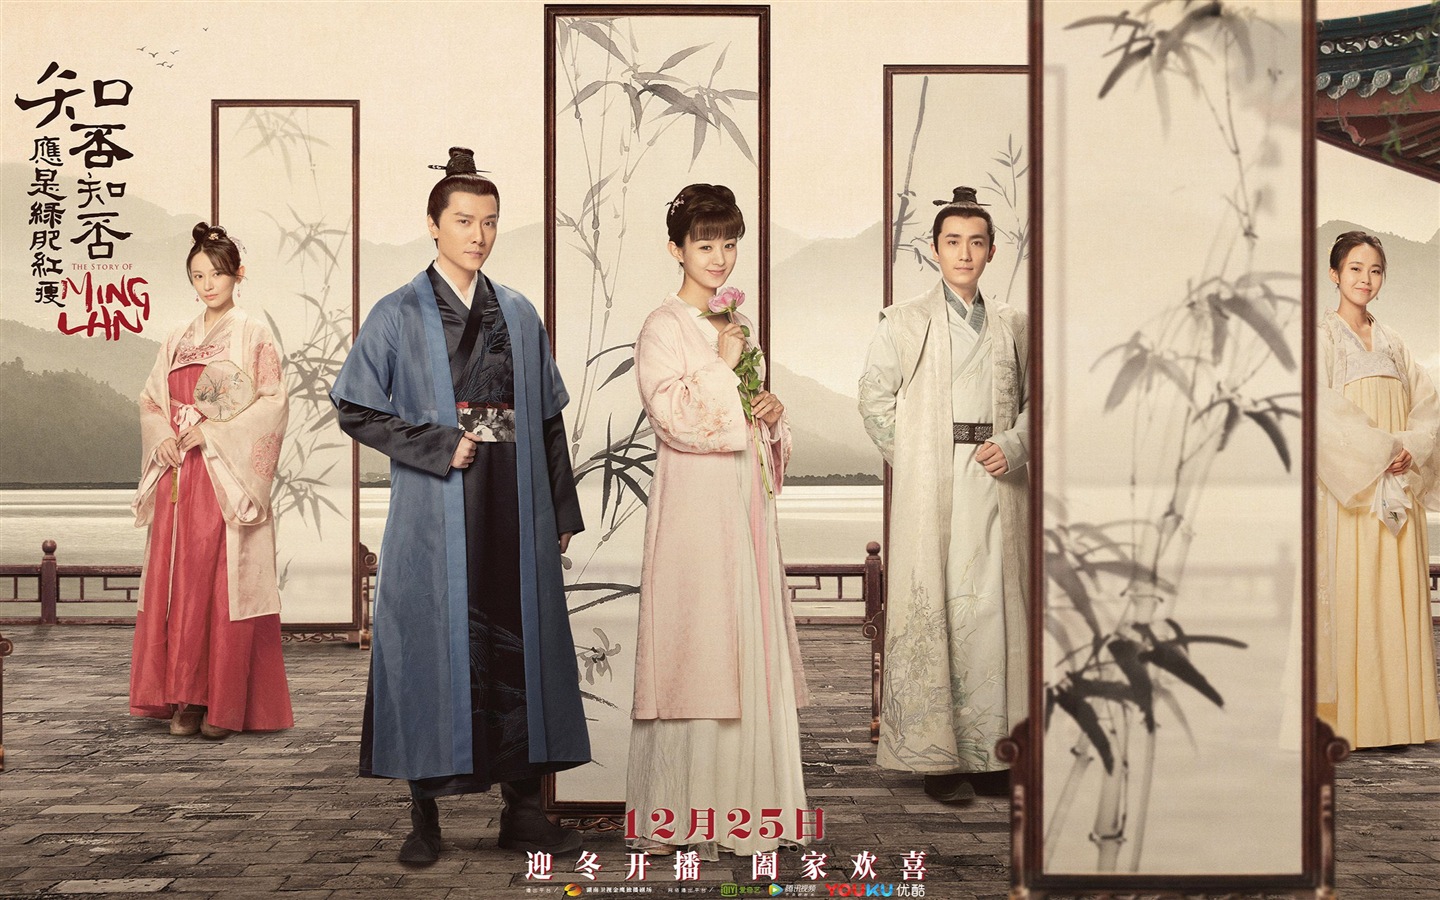 The Story Of MingLan, TV series HD wallpapers #35 - 1440x900